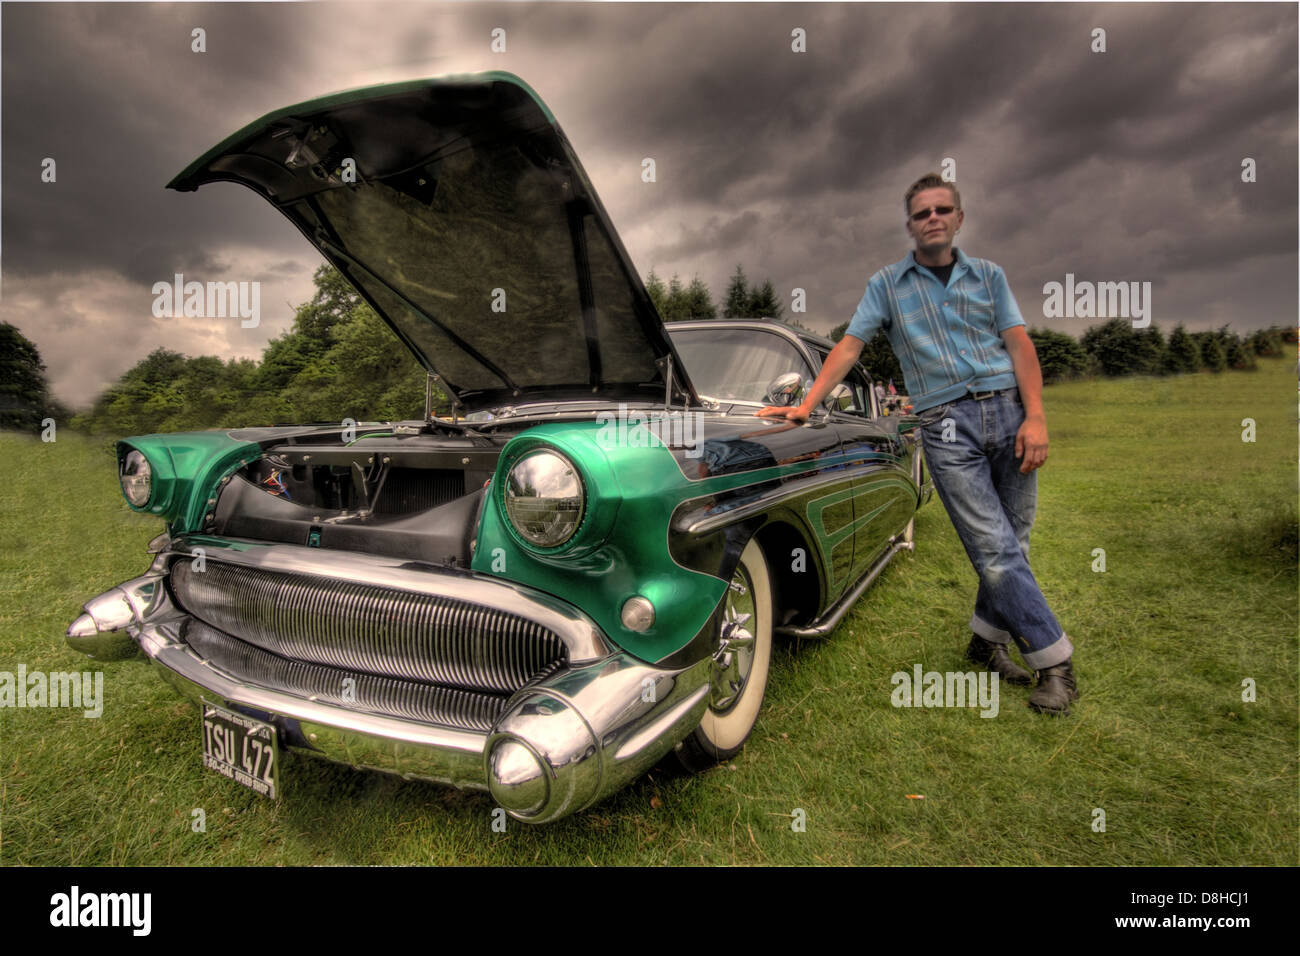 Black & Green 1957 Buick classic car ; Dave Weatherby with his award winning American 1957 classic car Stock Photo